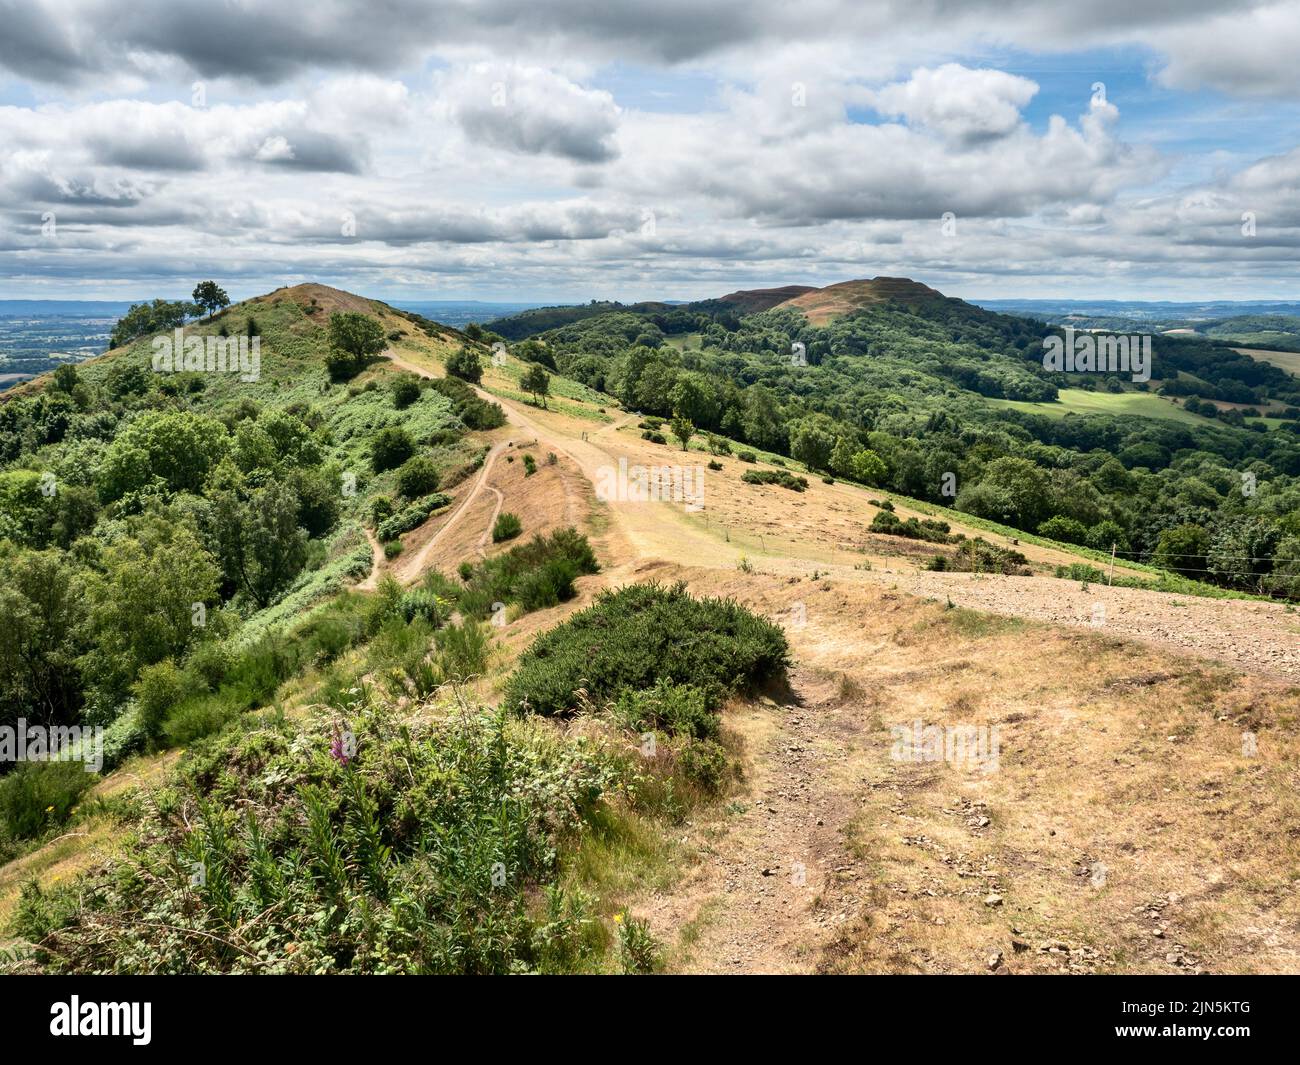 Looking along the ridge of the Malvern Hills from Black Hill to Herefordshire Beacon or British Camp Malvern Hills AONB England Stock Photo